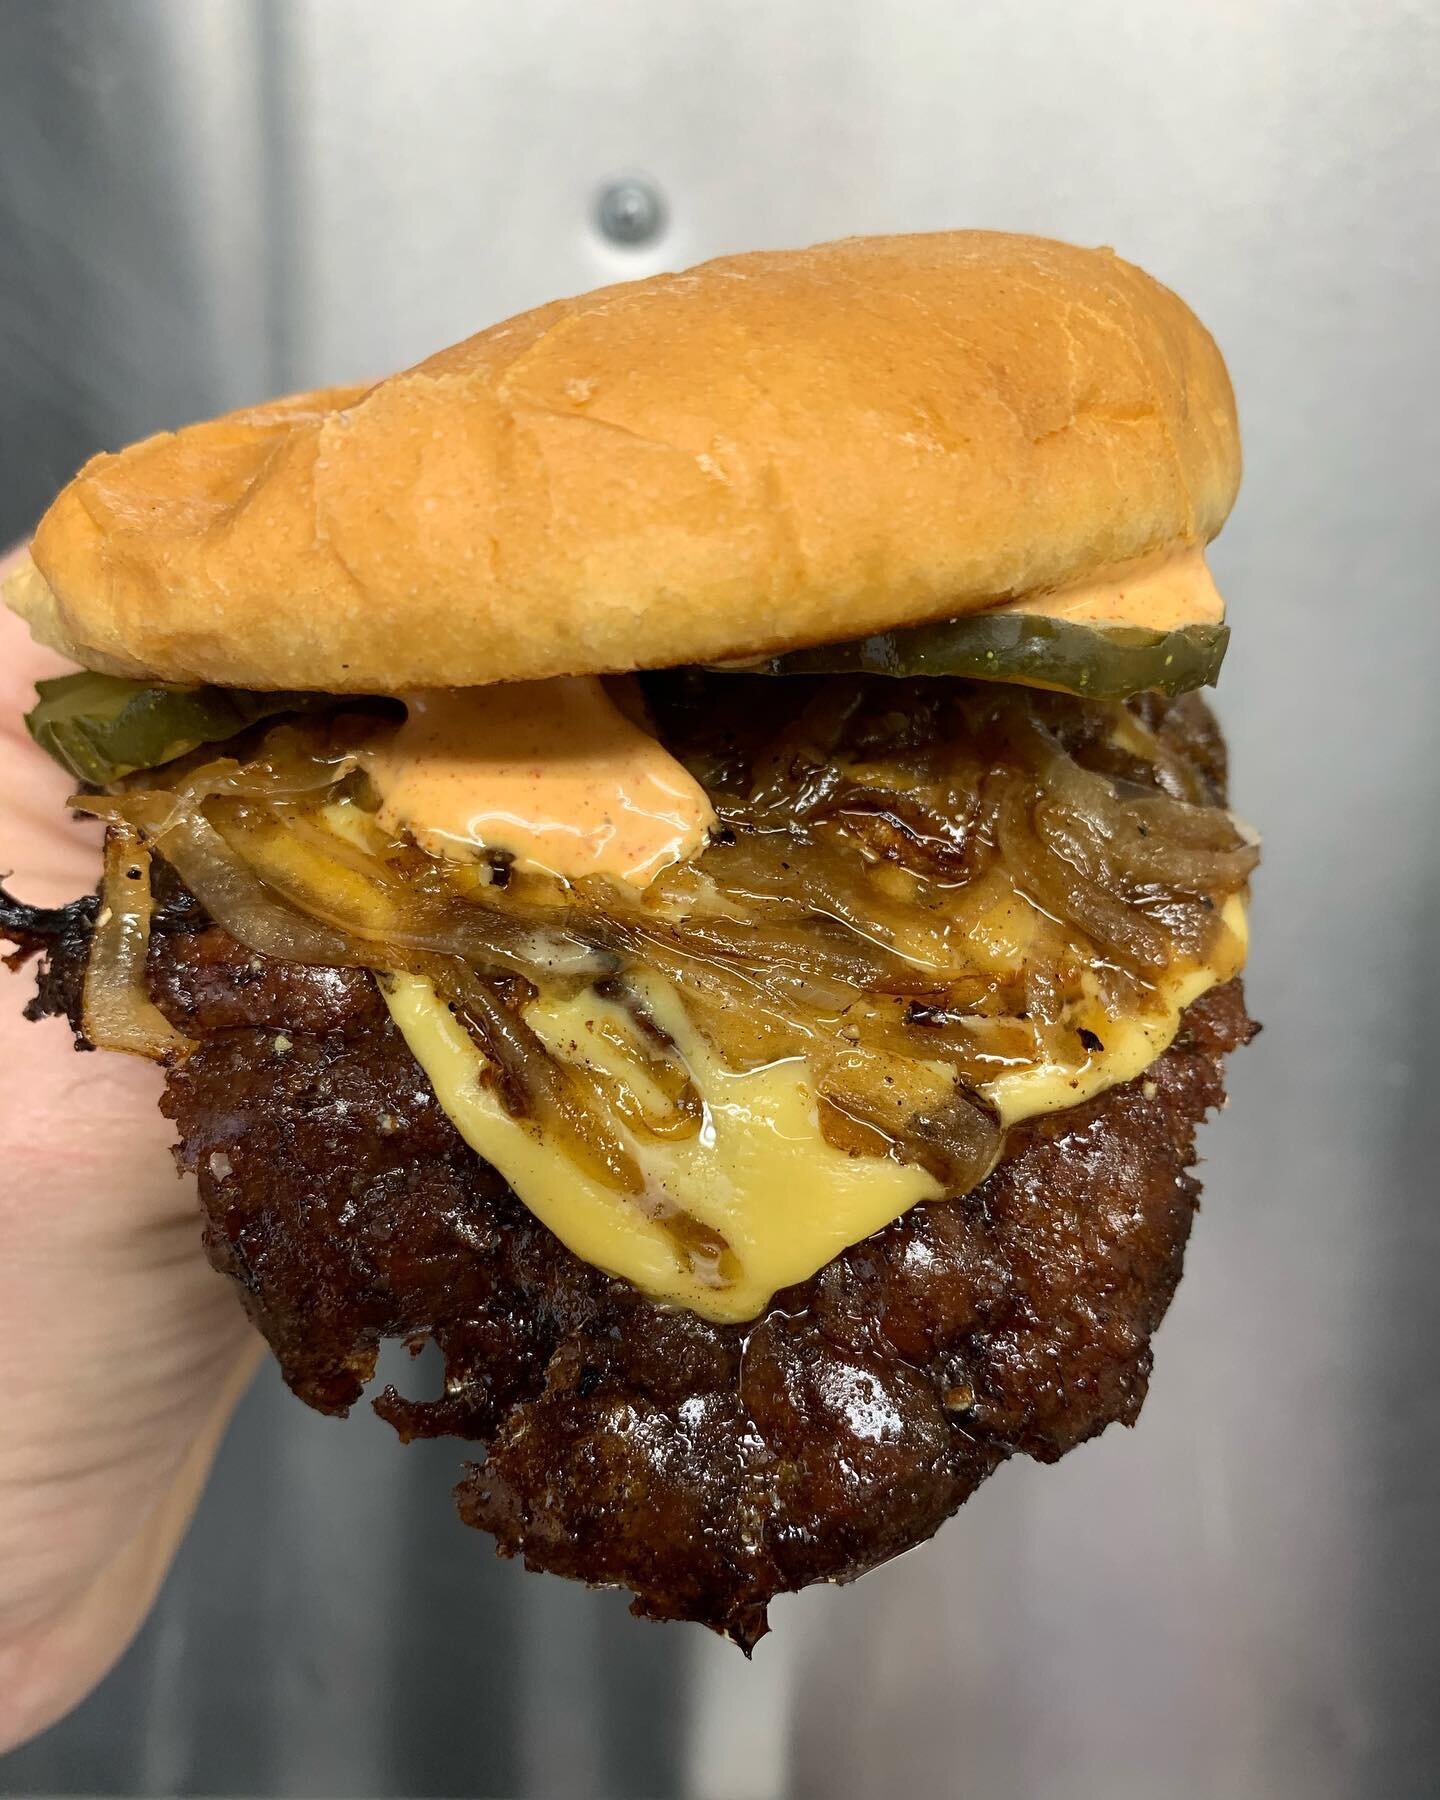 MOIST &amp; CRUSTY Smell-O-Gram.
Now available 7 DAYS/Week at PROST.
Get yo BOIGER on.
Order in advance: 
www.orderburgerstevens.com
#cheeseburger #burger #burgers #pdxburger #pdx #portland #smashburger #classic #quality #hamburger #americancheese #g